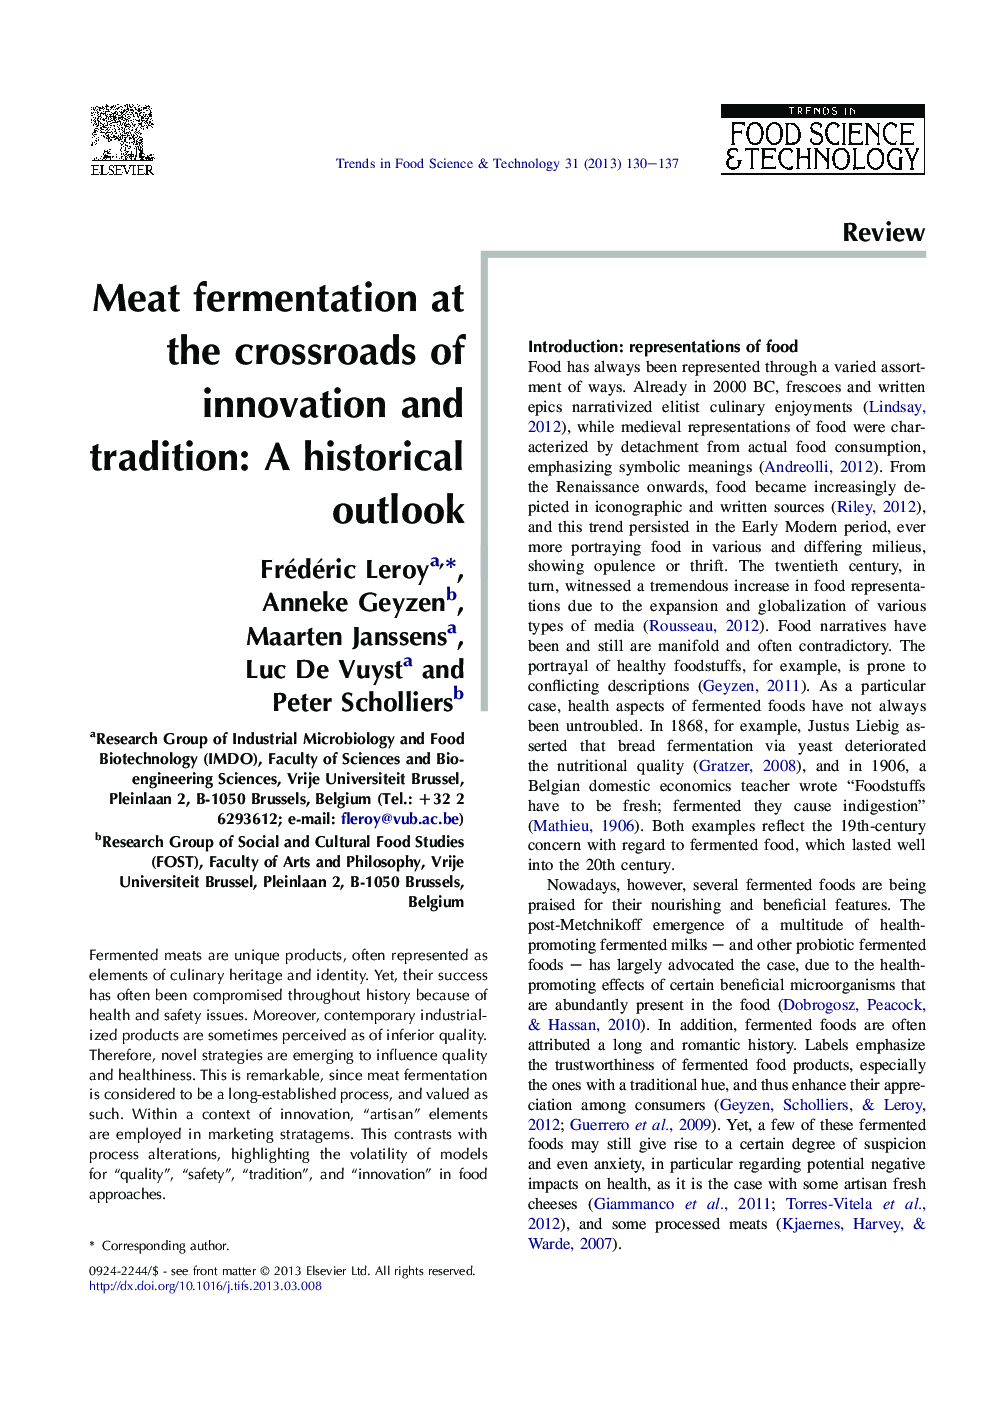 Meat fermentation at the crossroads of innovation and tradition: A historical outlook